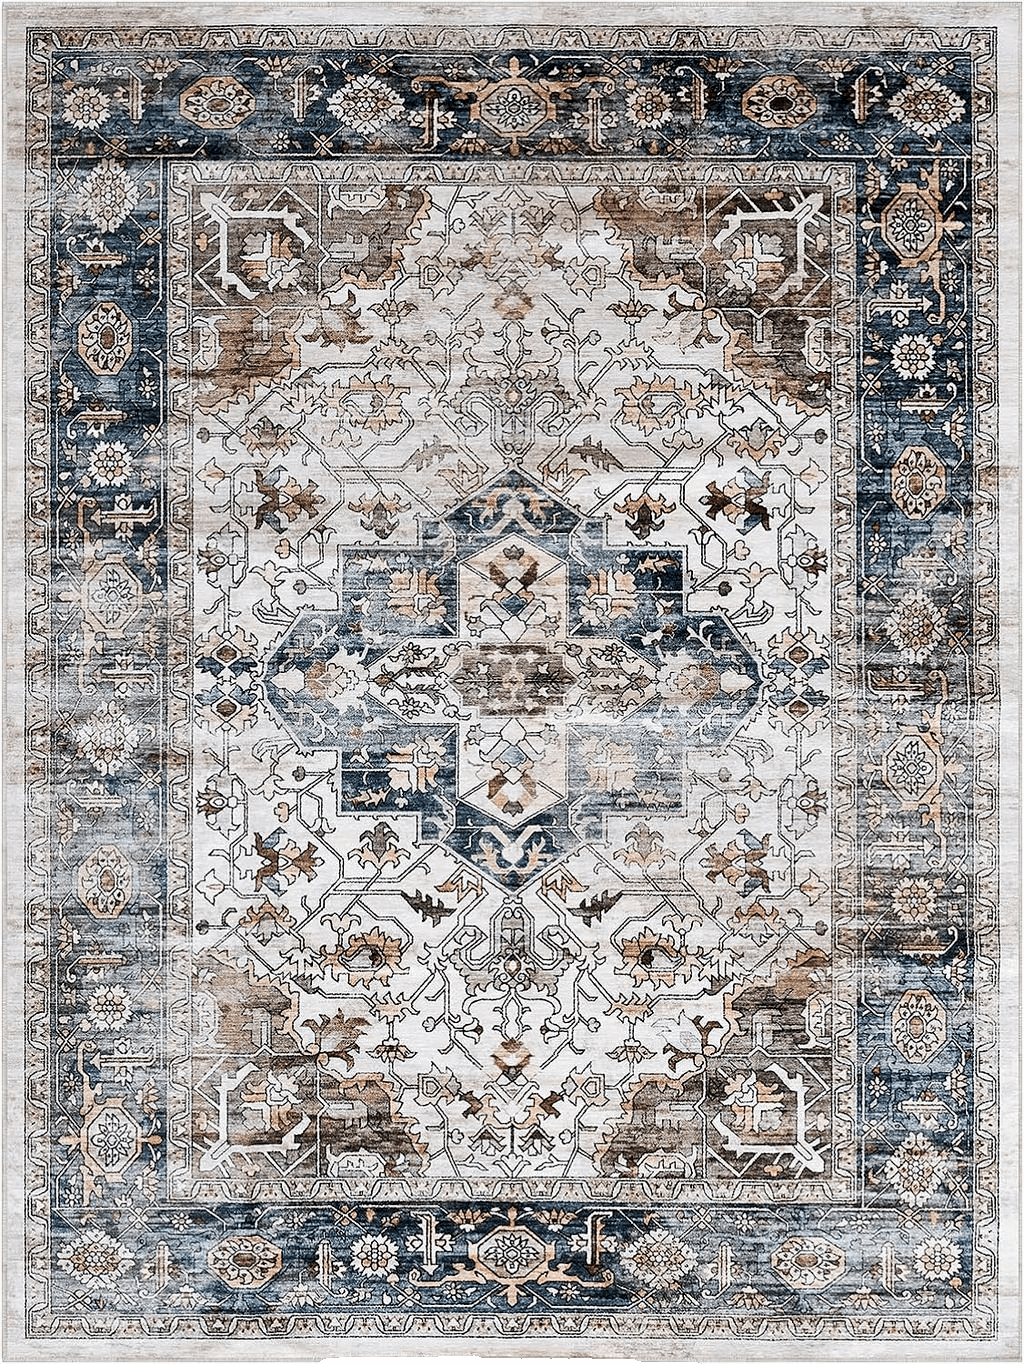 Grey White 8x10 Area Rugs for Living Room: Washable Rugs Carpet for Living Room with Non-Slip Backing Non-Shedding Stain Resistant, Boho Floral Large Rugs for Dining Room Nursery Home Office (Blue Multi)